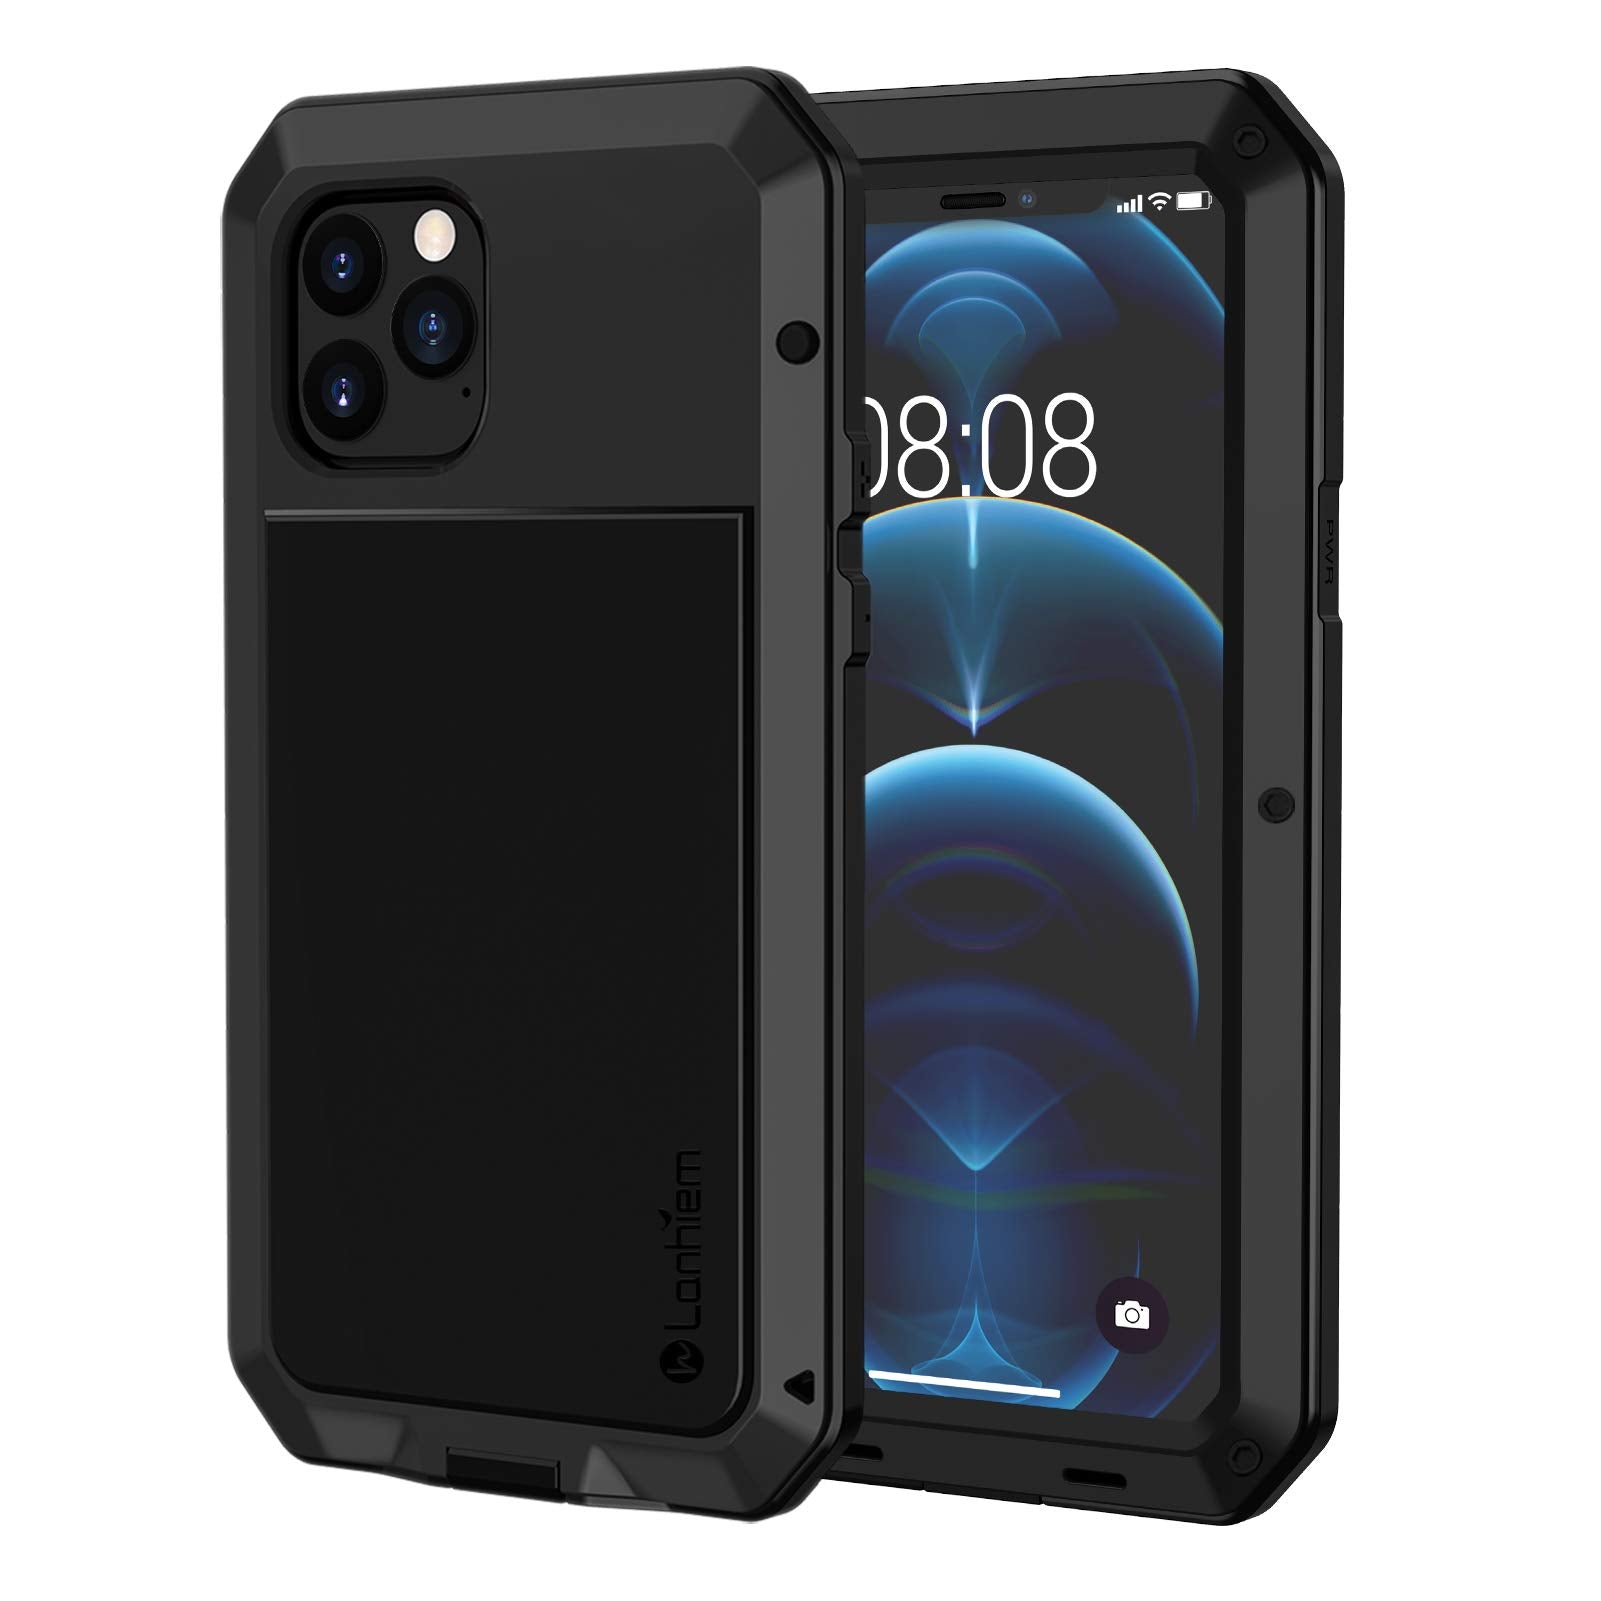 Lanhiem Heavy Duty Case Design for iPhone 12 / iPhone 12 Pro Shockproof Tough Armour Metal Case with [Tempered Glass Screen Film], 360 Full Body Protective Case Cover for iPhone 12/12 Pro -Black